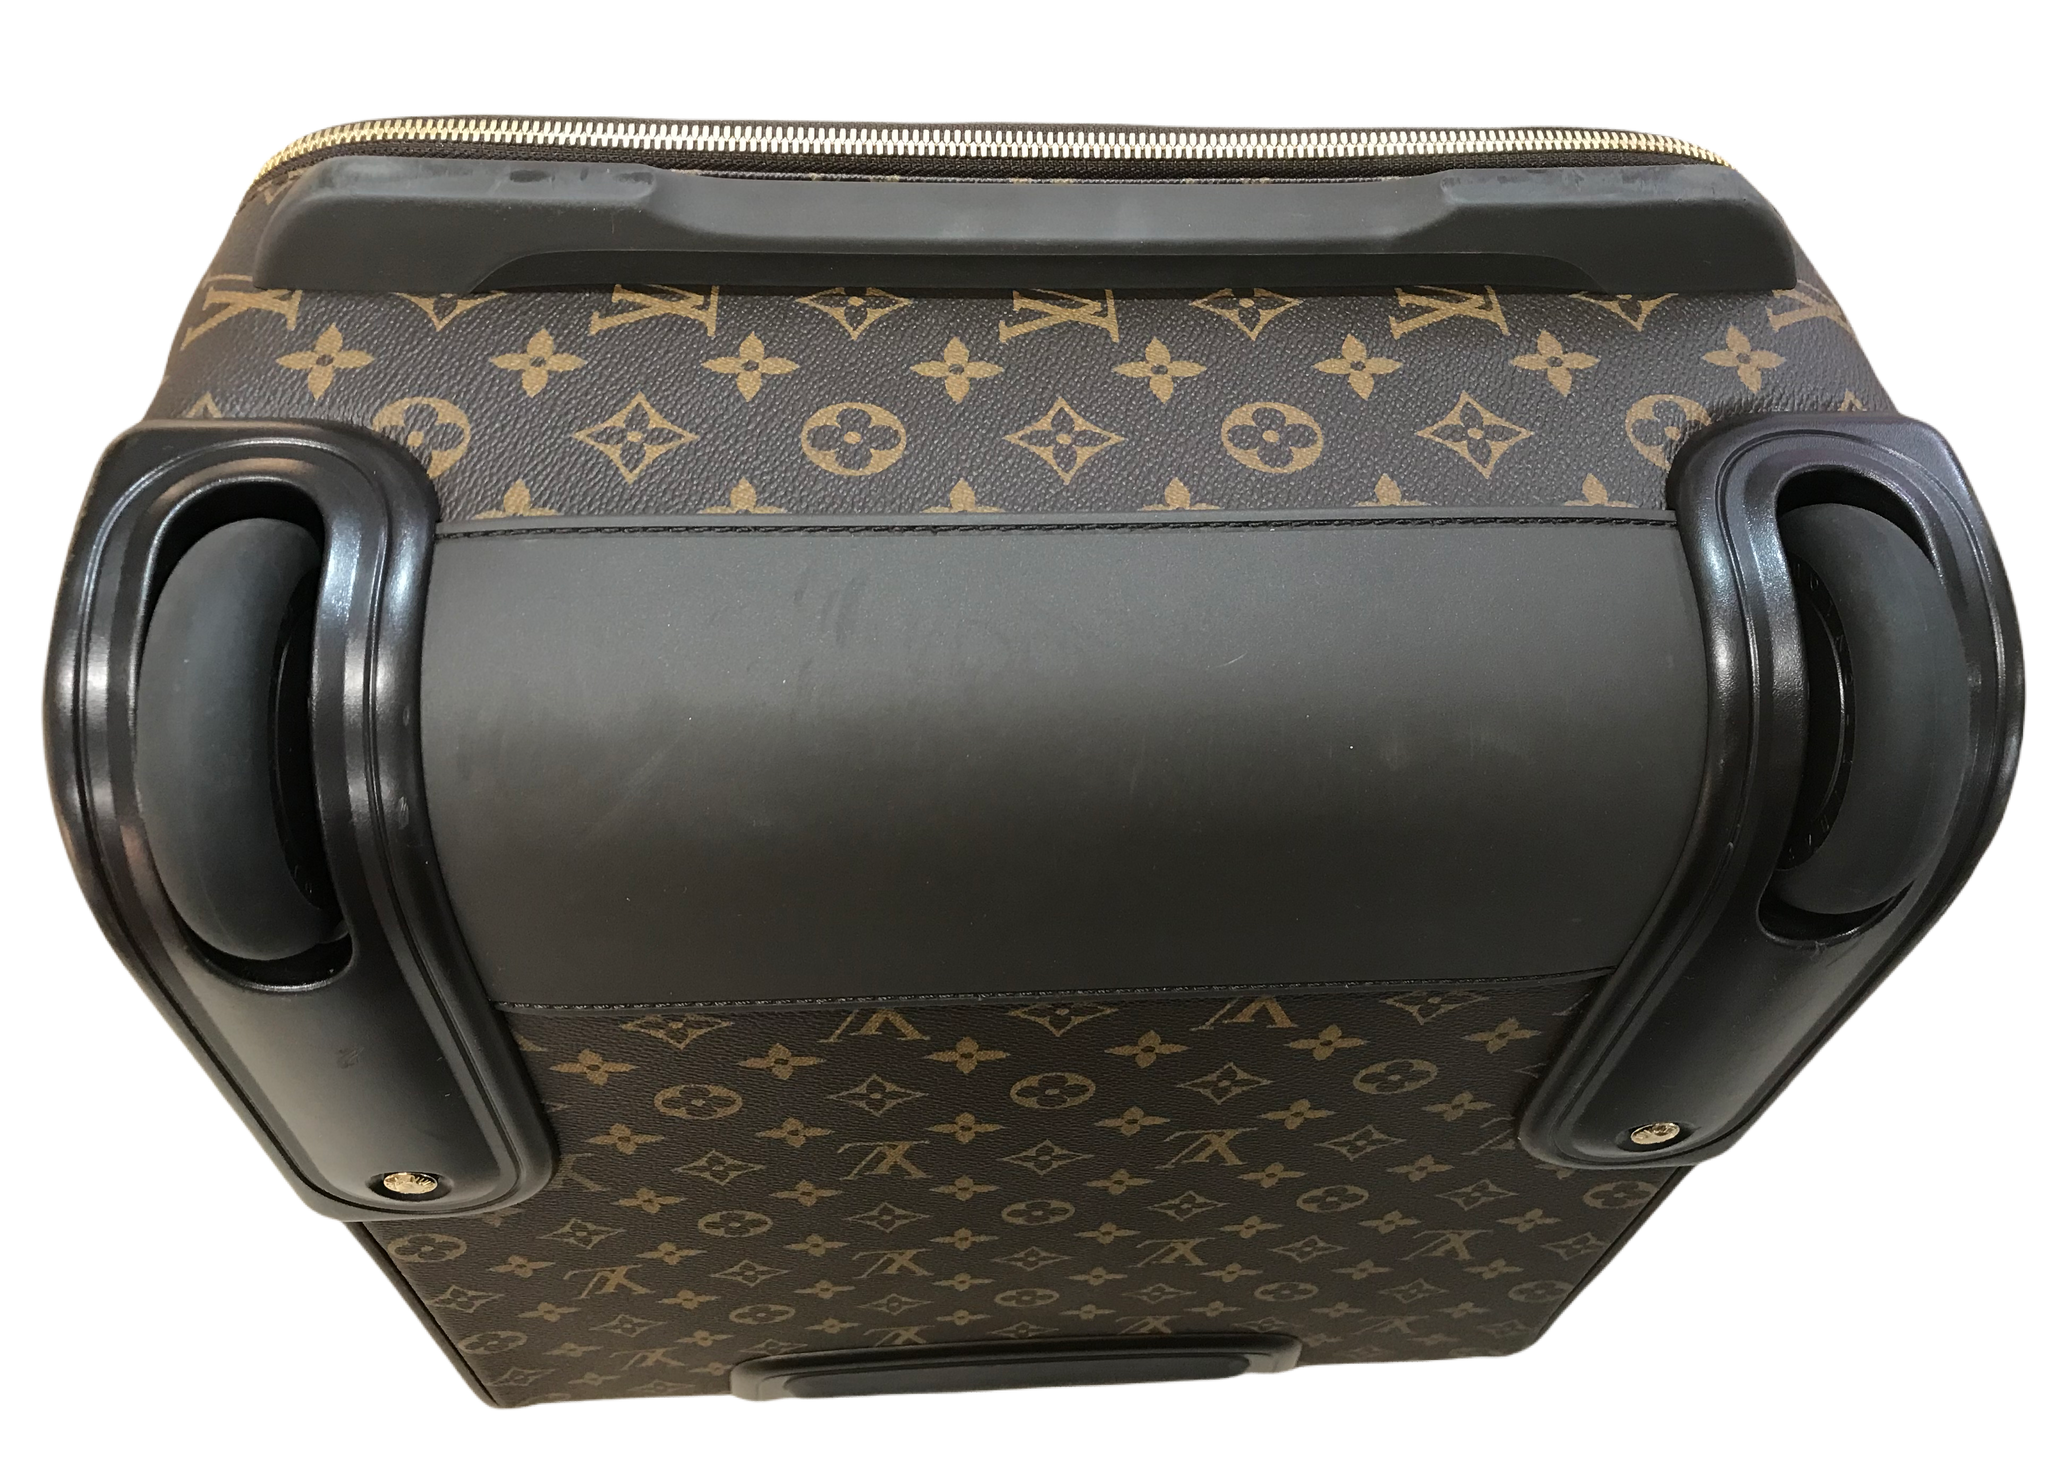 Louis Vuitton Pre-owned Pegase 45 Suitcase - Red